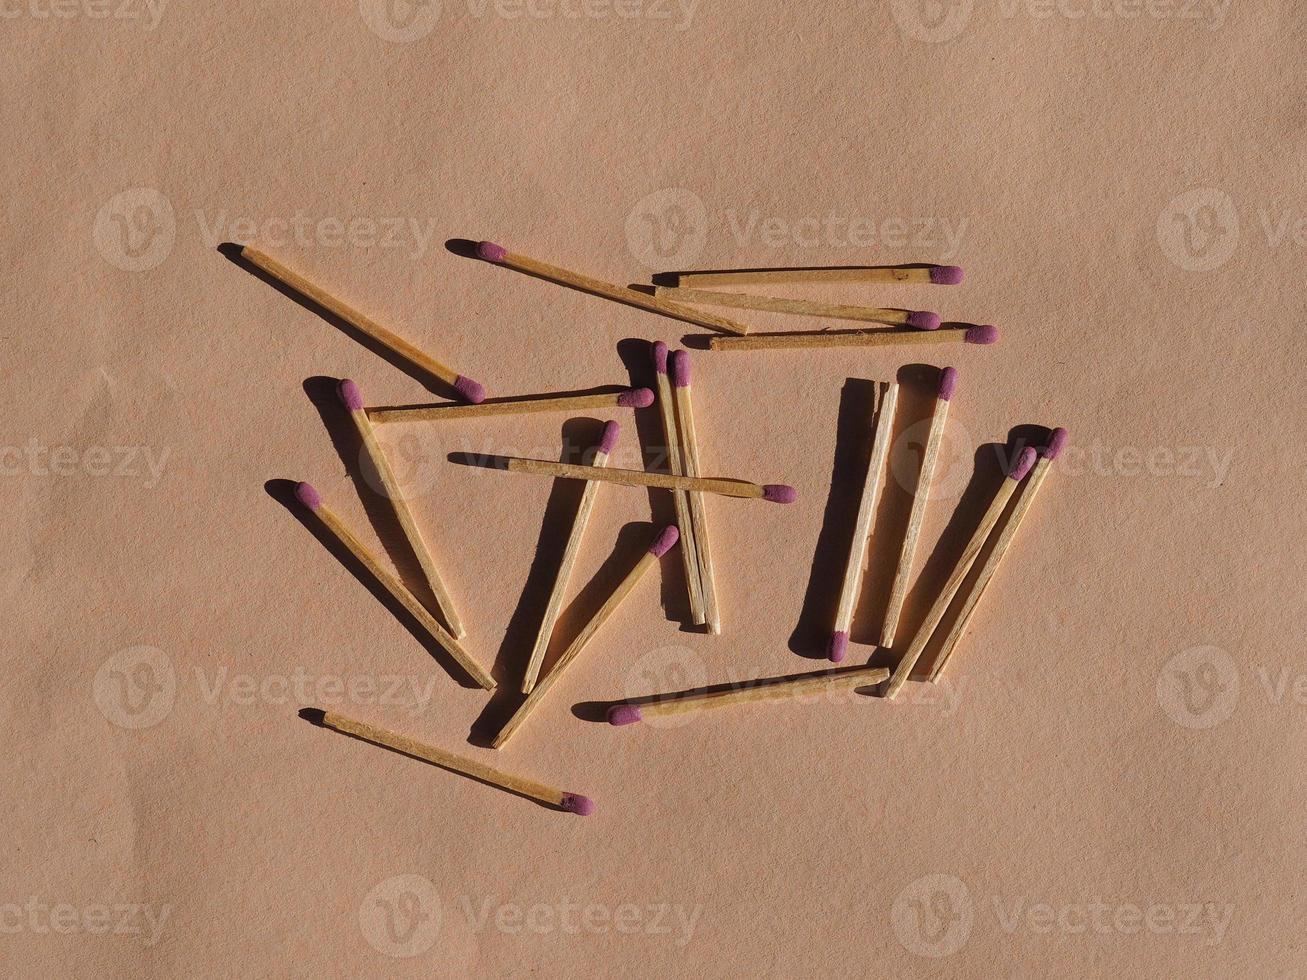 matches sticks for lighting fires photo